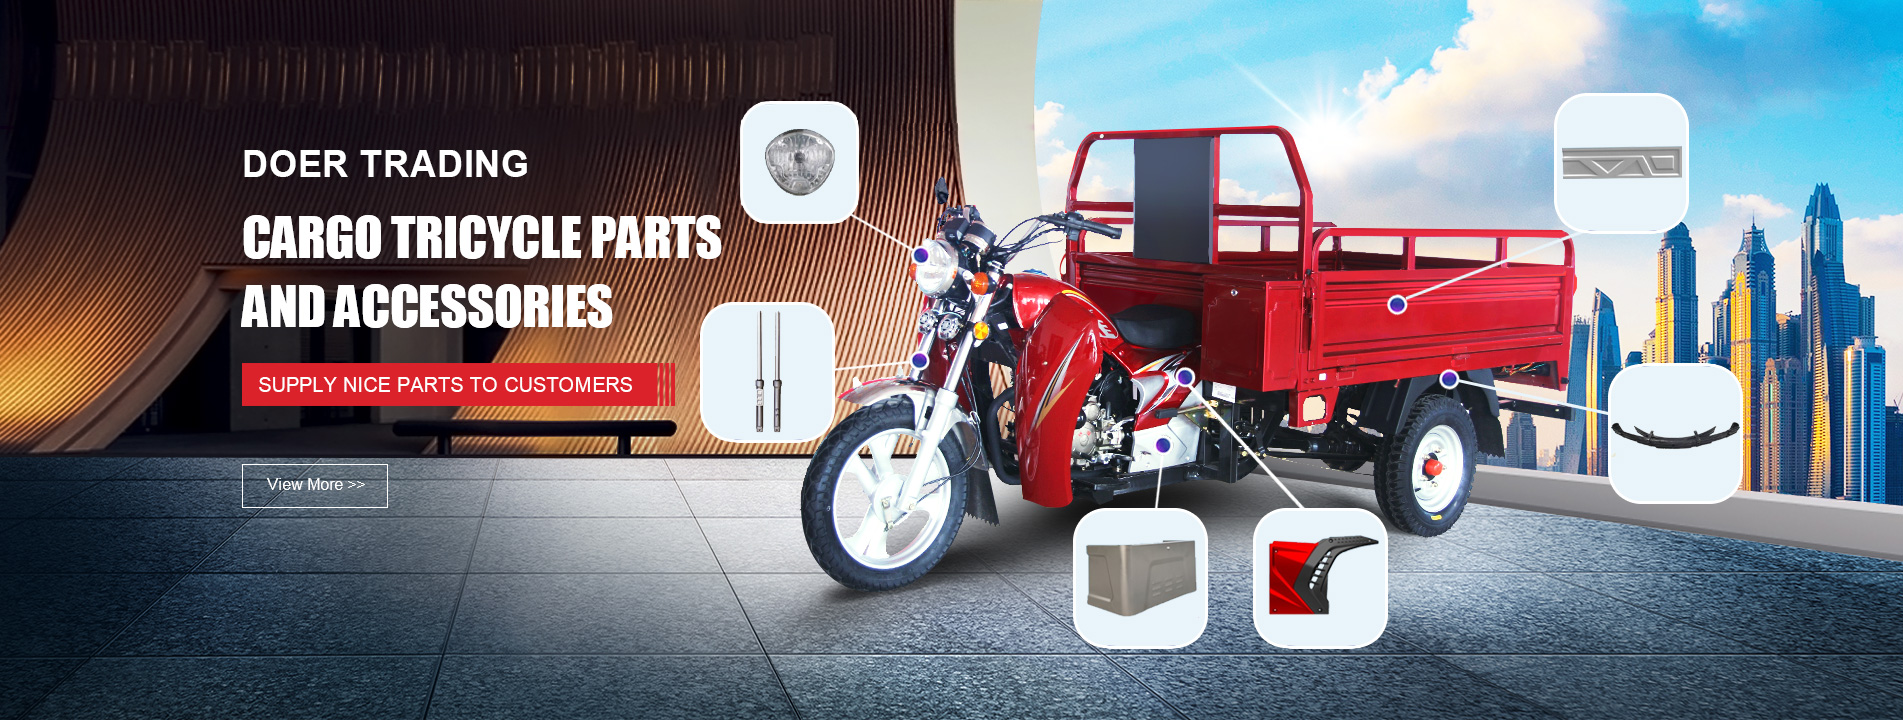 CARGO TRICYCLE PARTS AND ACCESSORIES